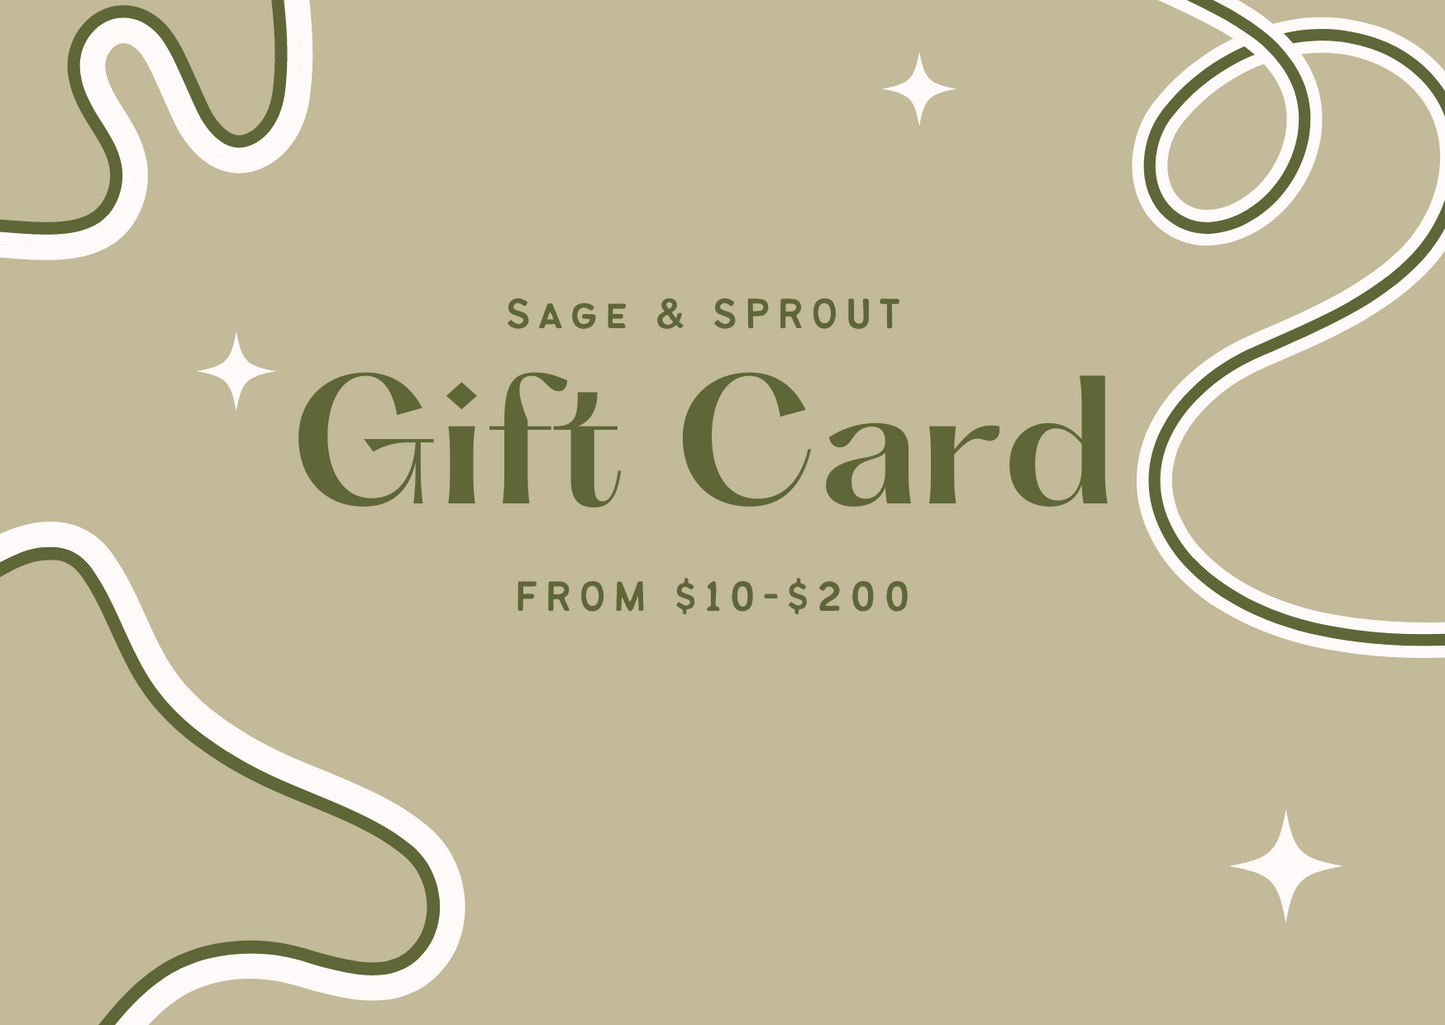 SAGE & SPROUT GIFT CARD